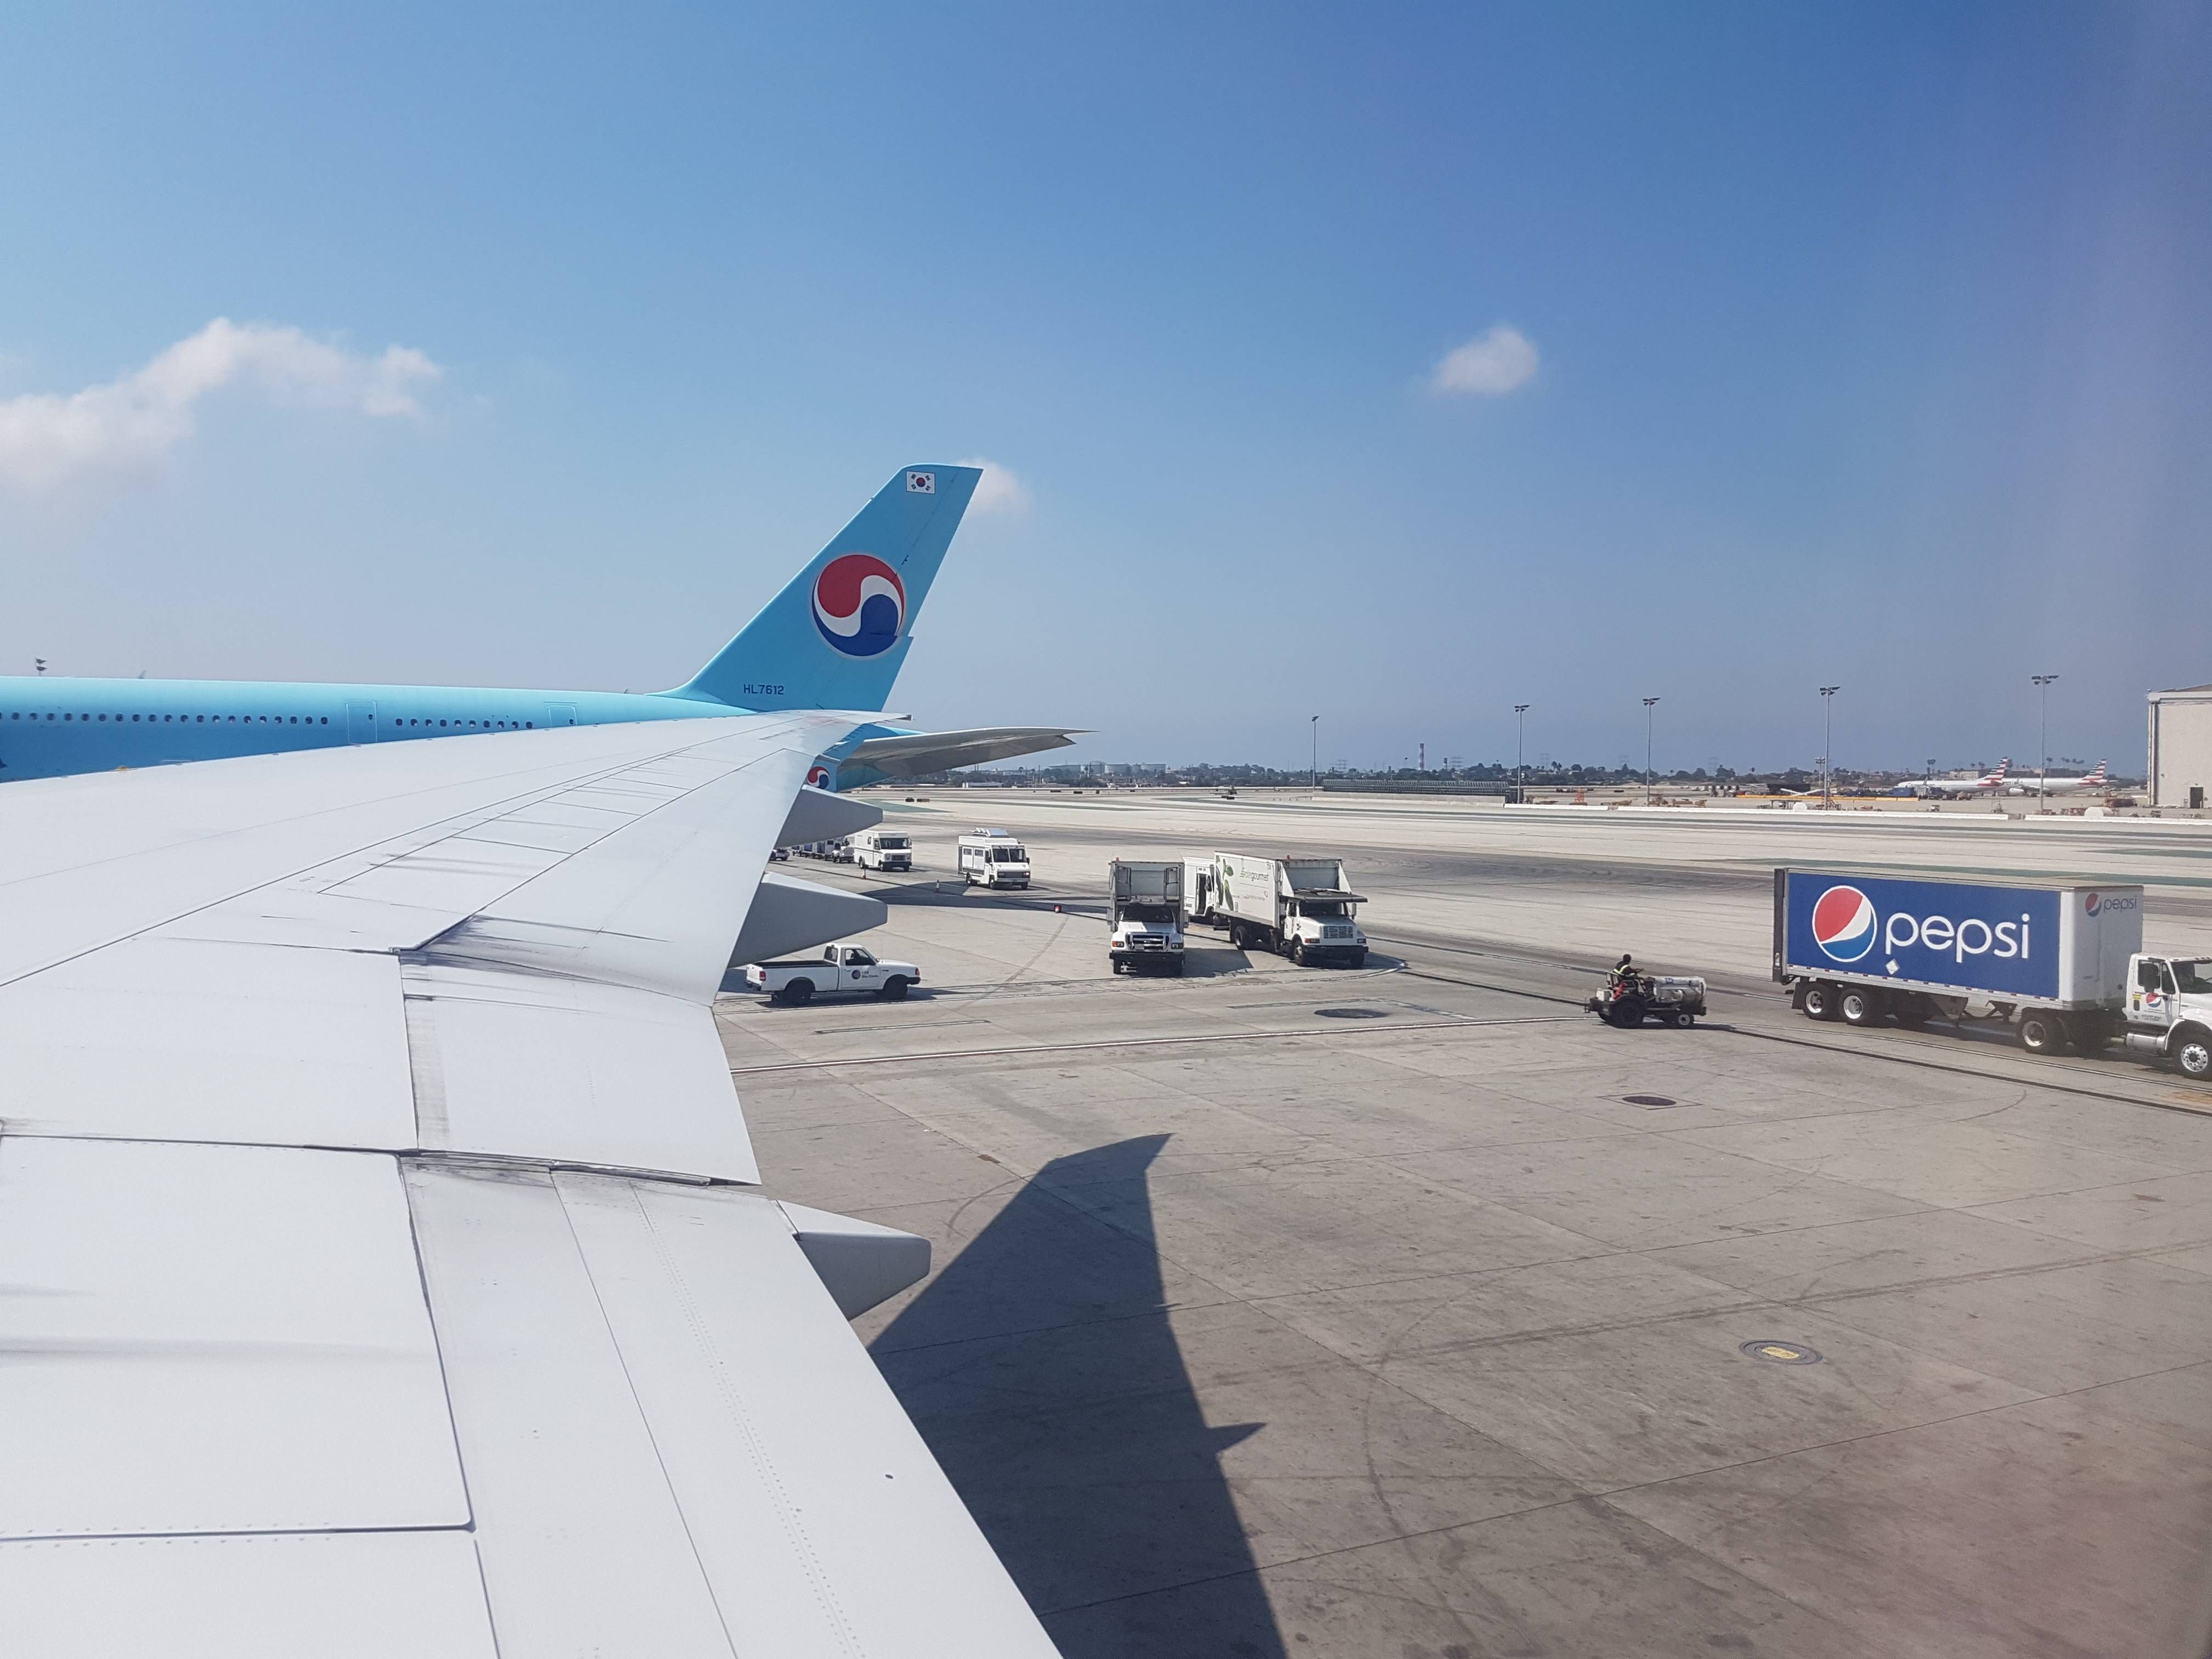 I said to my wife, Korean air looks like the Pepsi symbol when all of a sudden